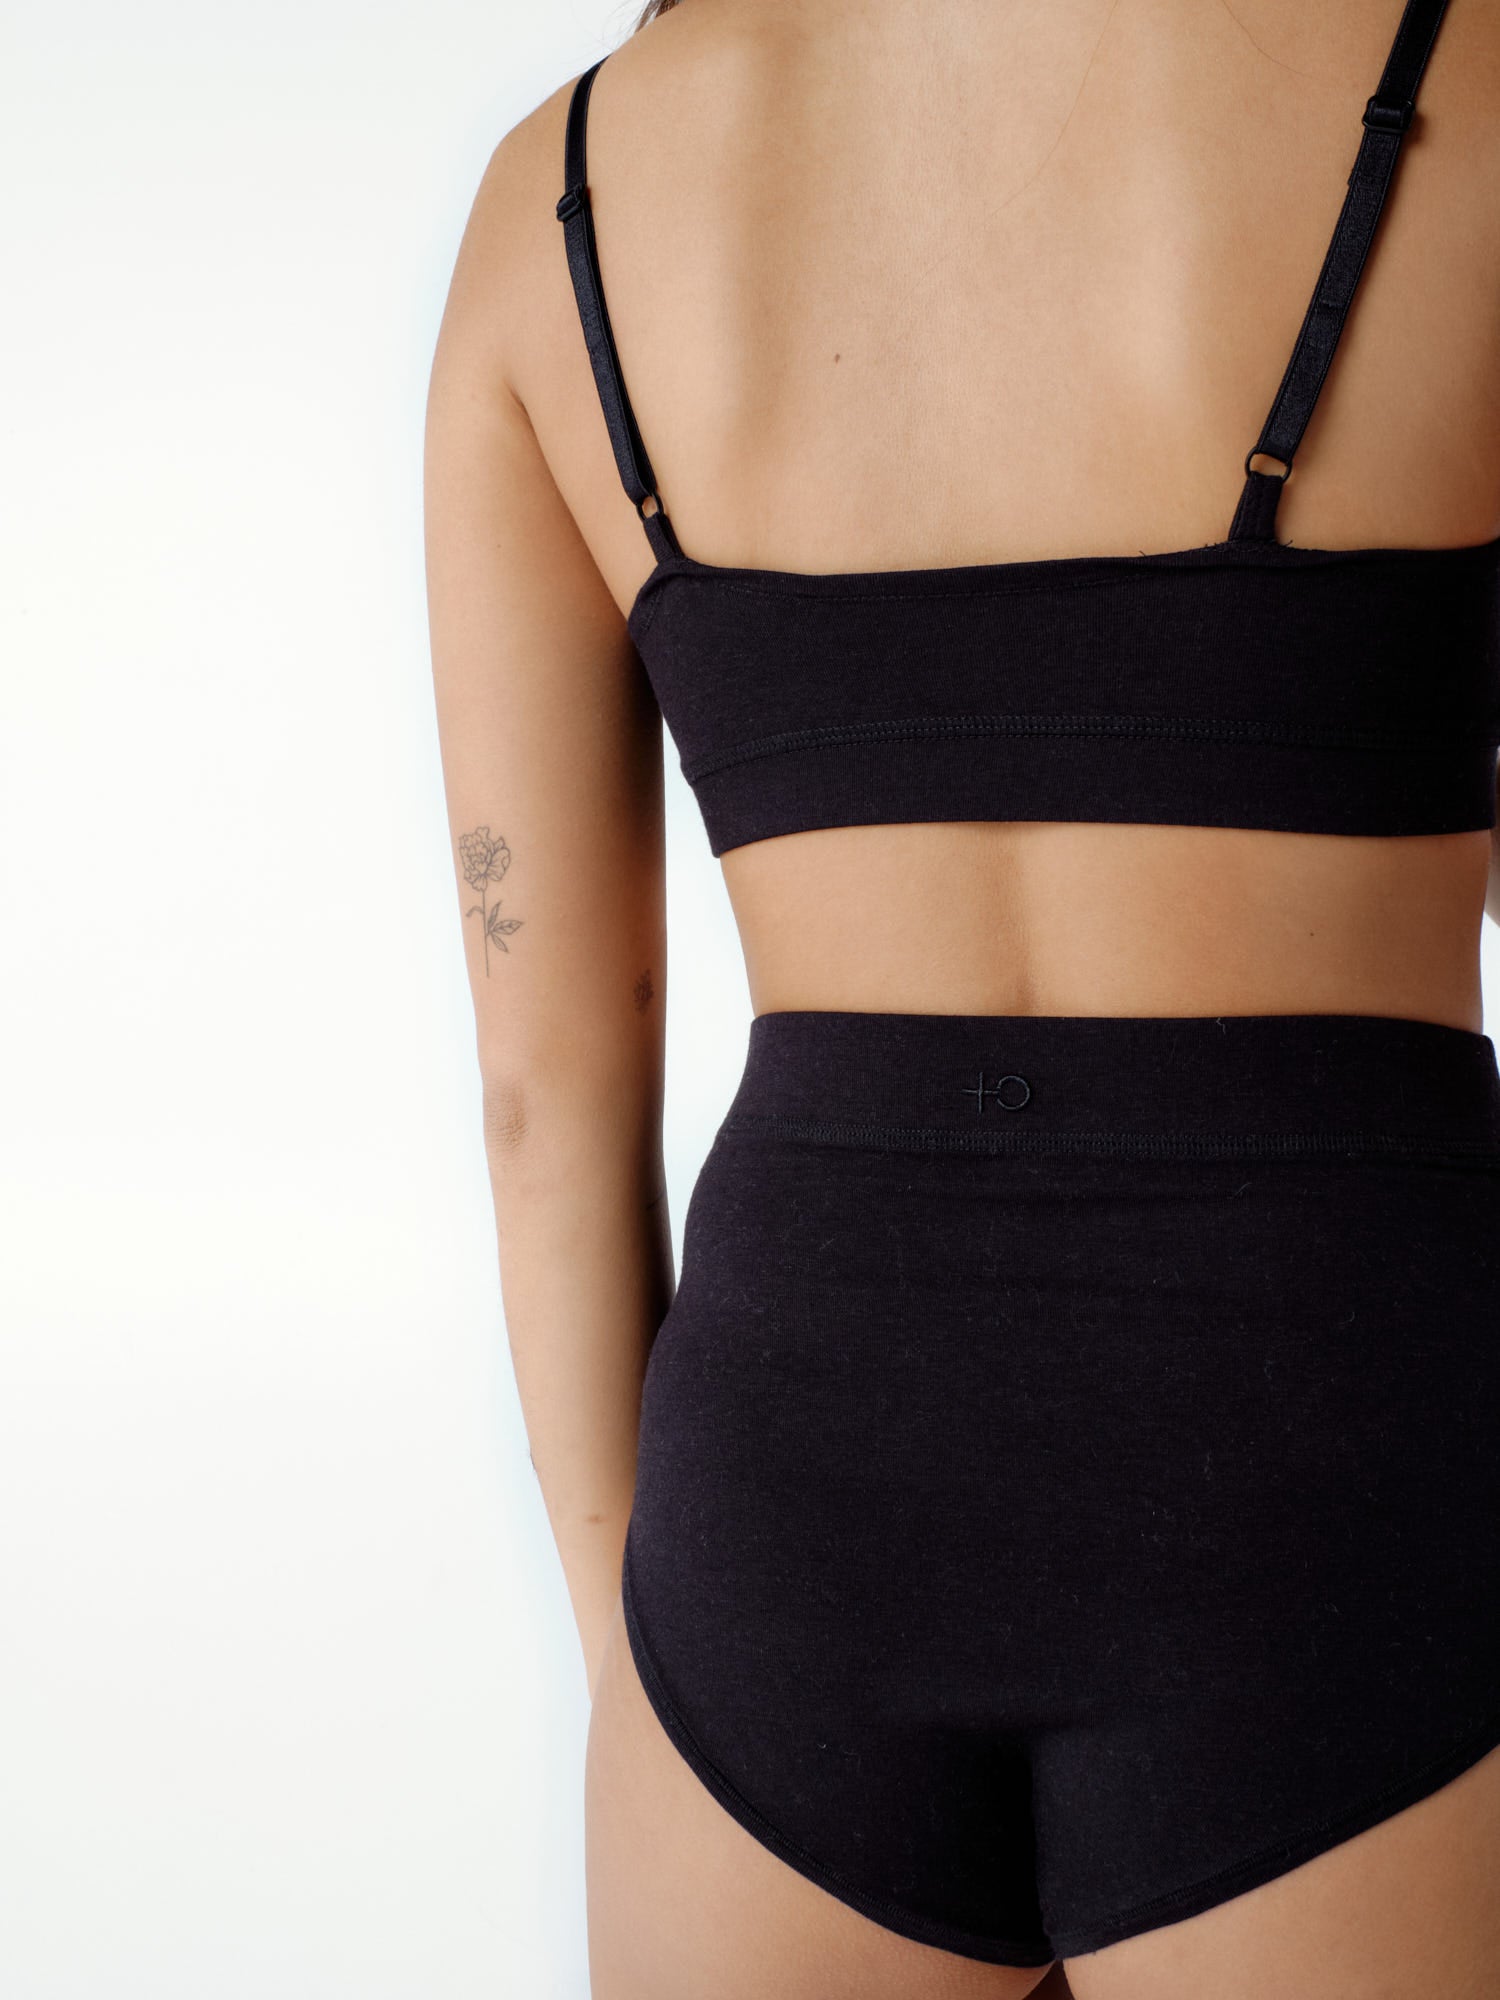 Bamboo - Square Bralette - Positive Outlook Clothing